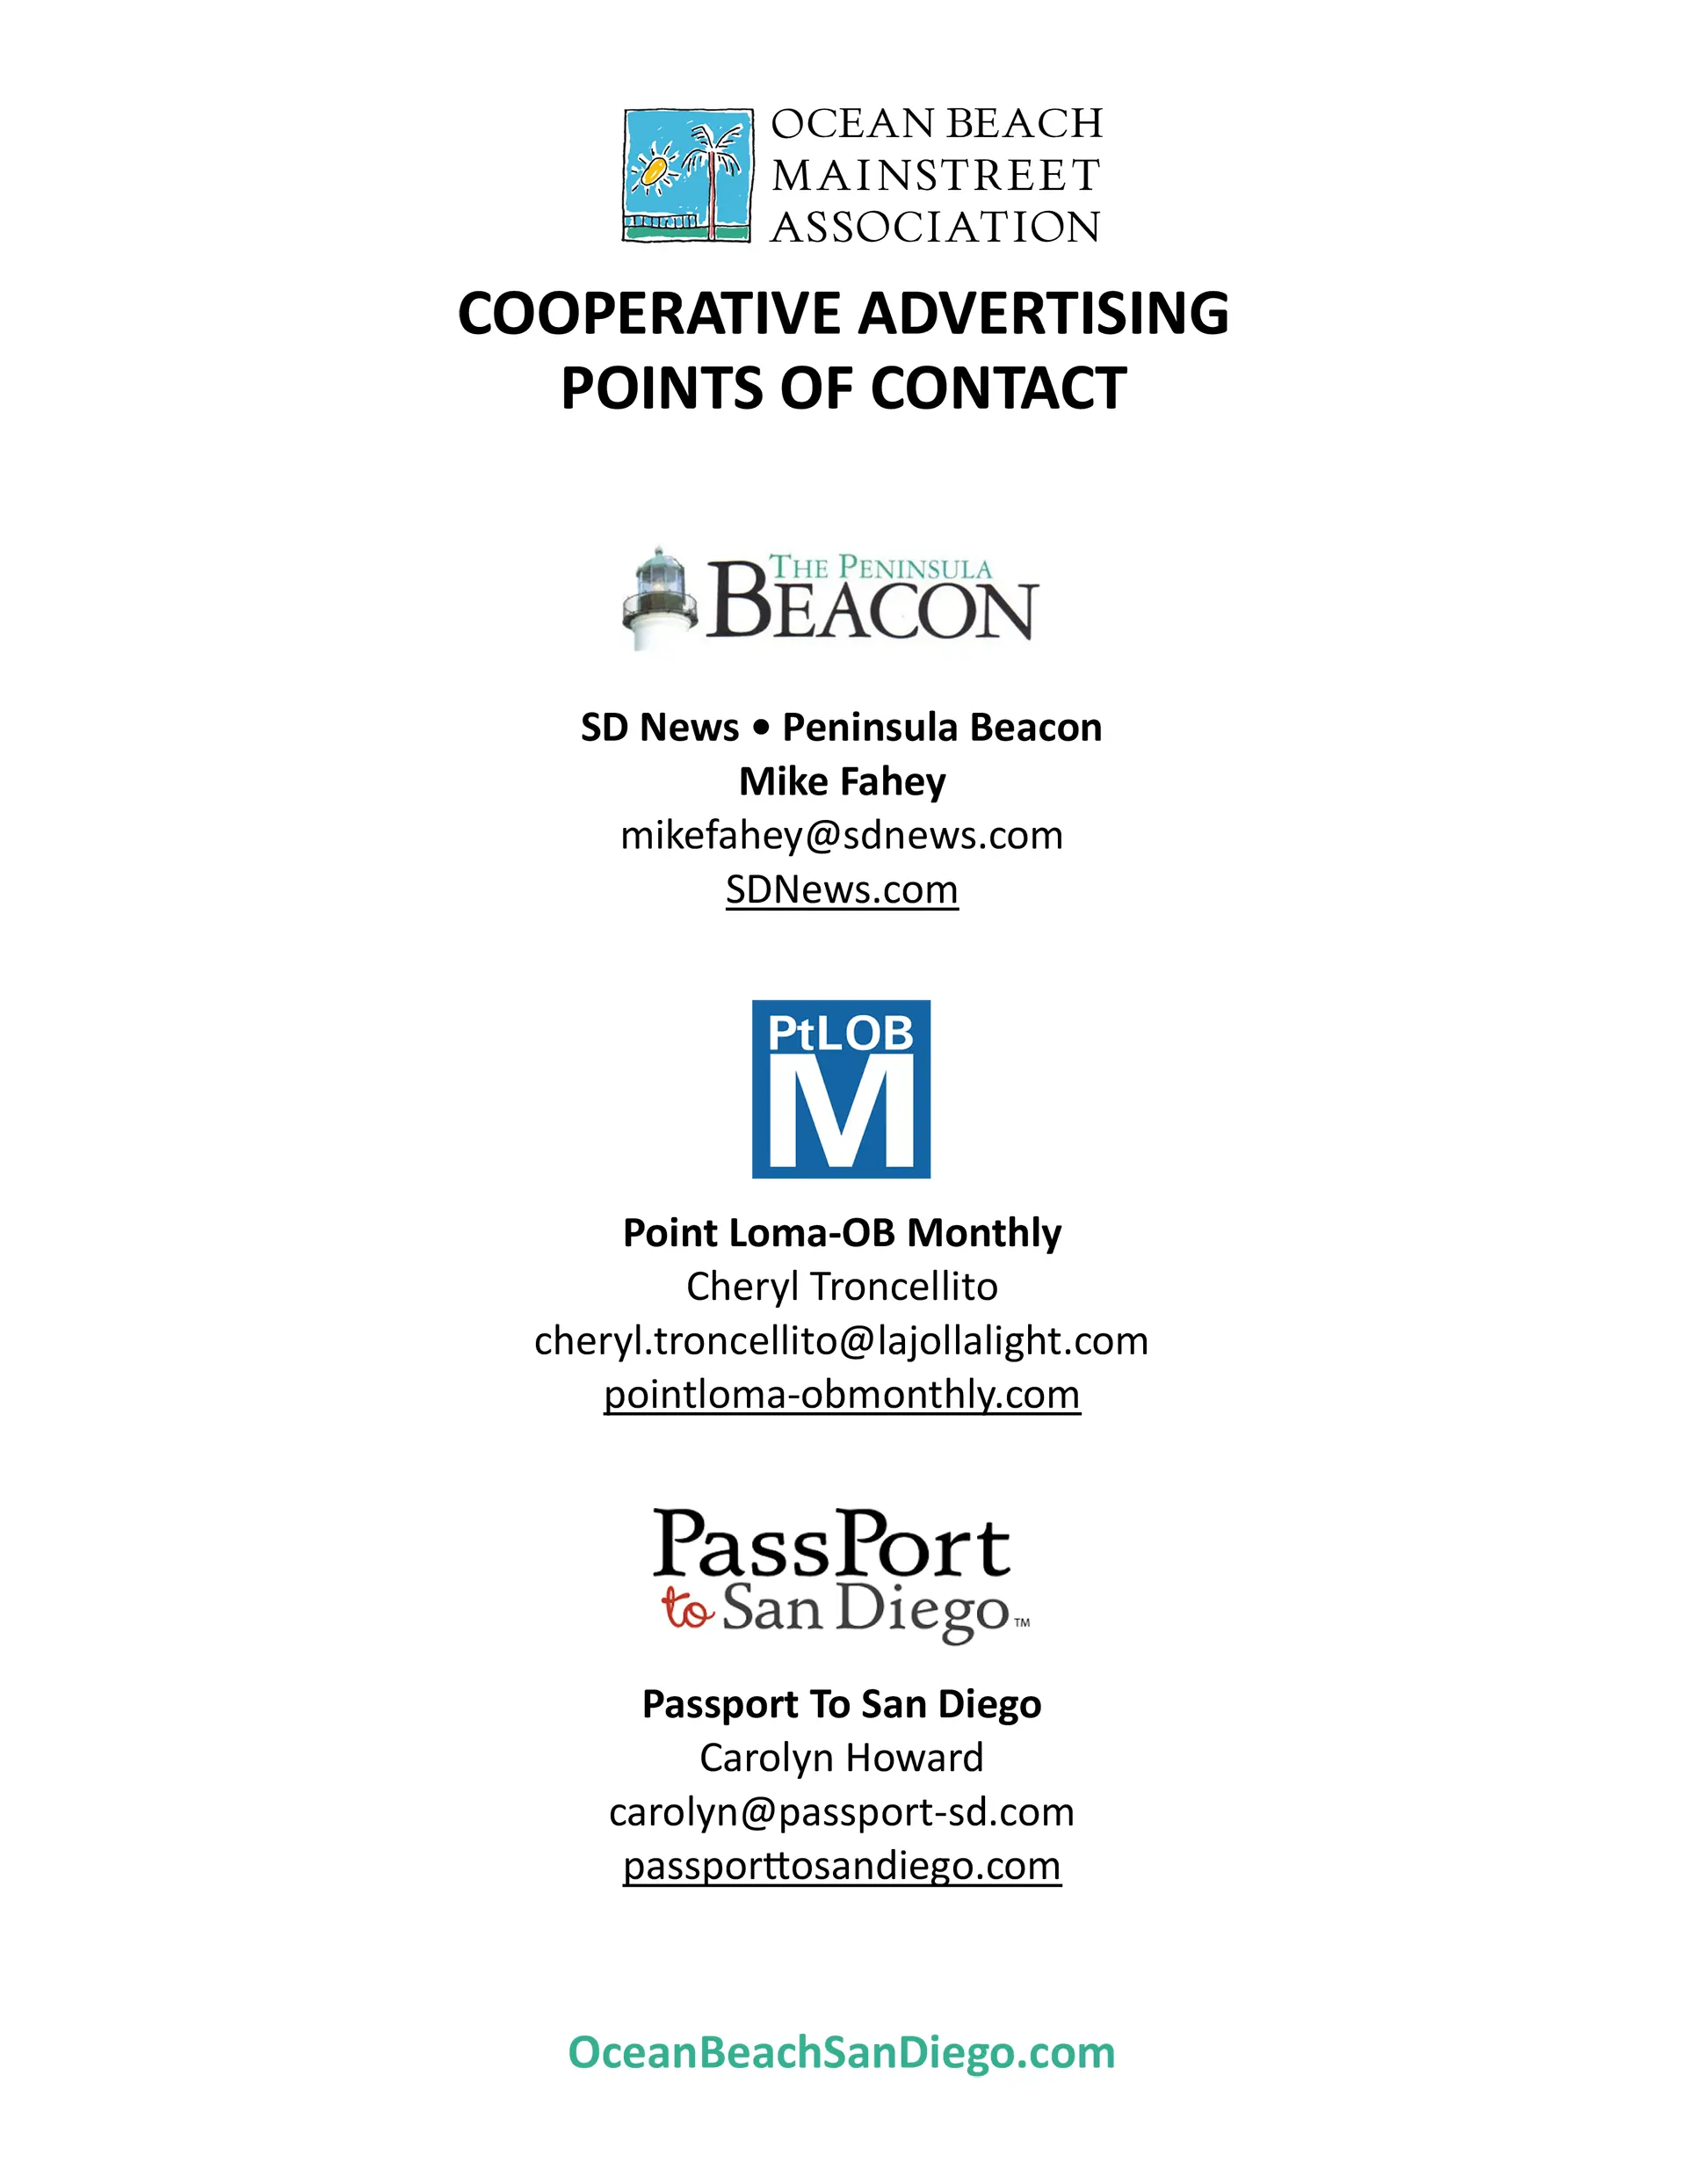 OBMA Cooperative Advertising Opportunities